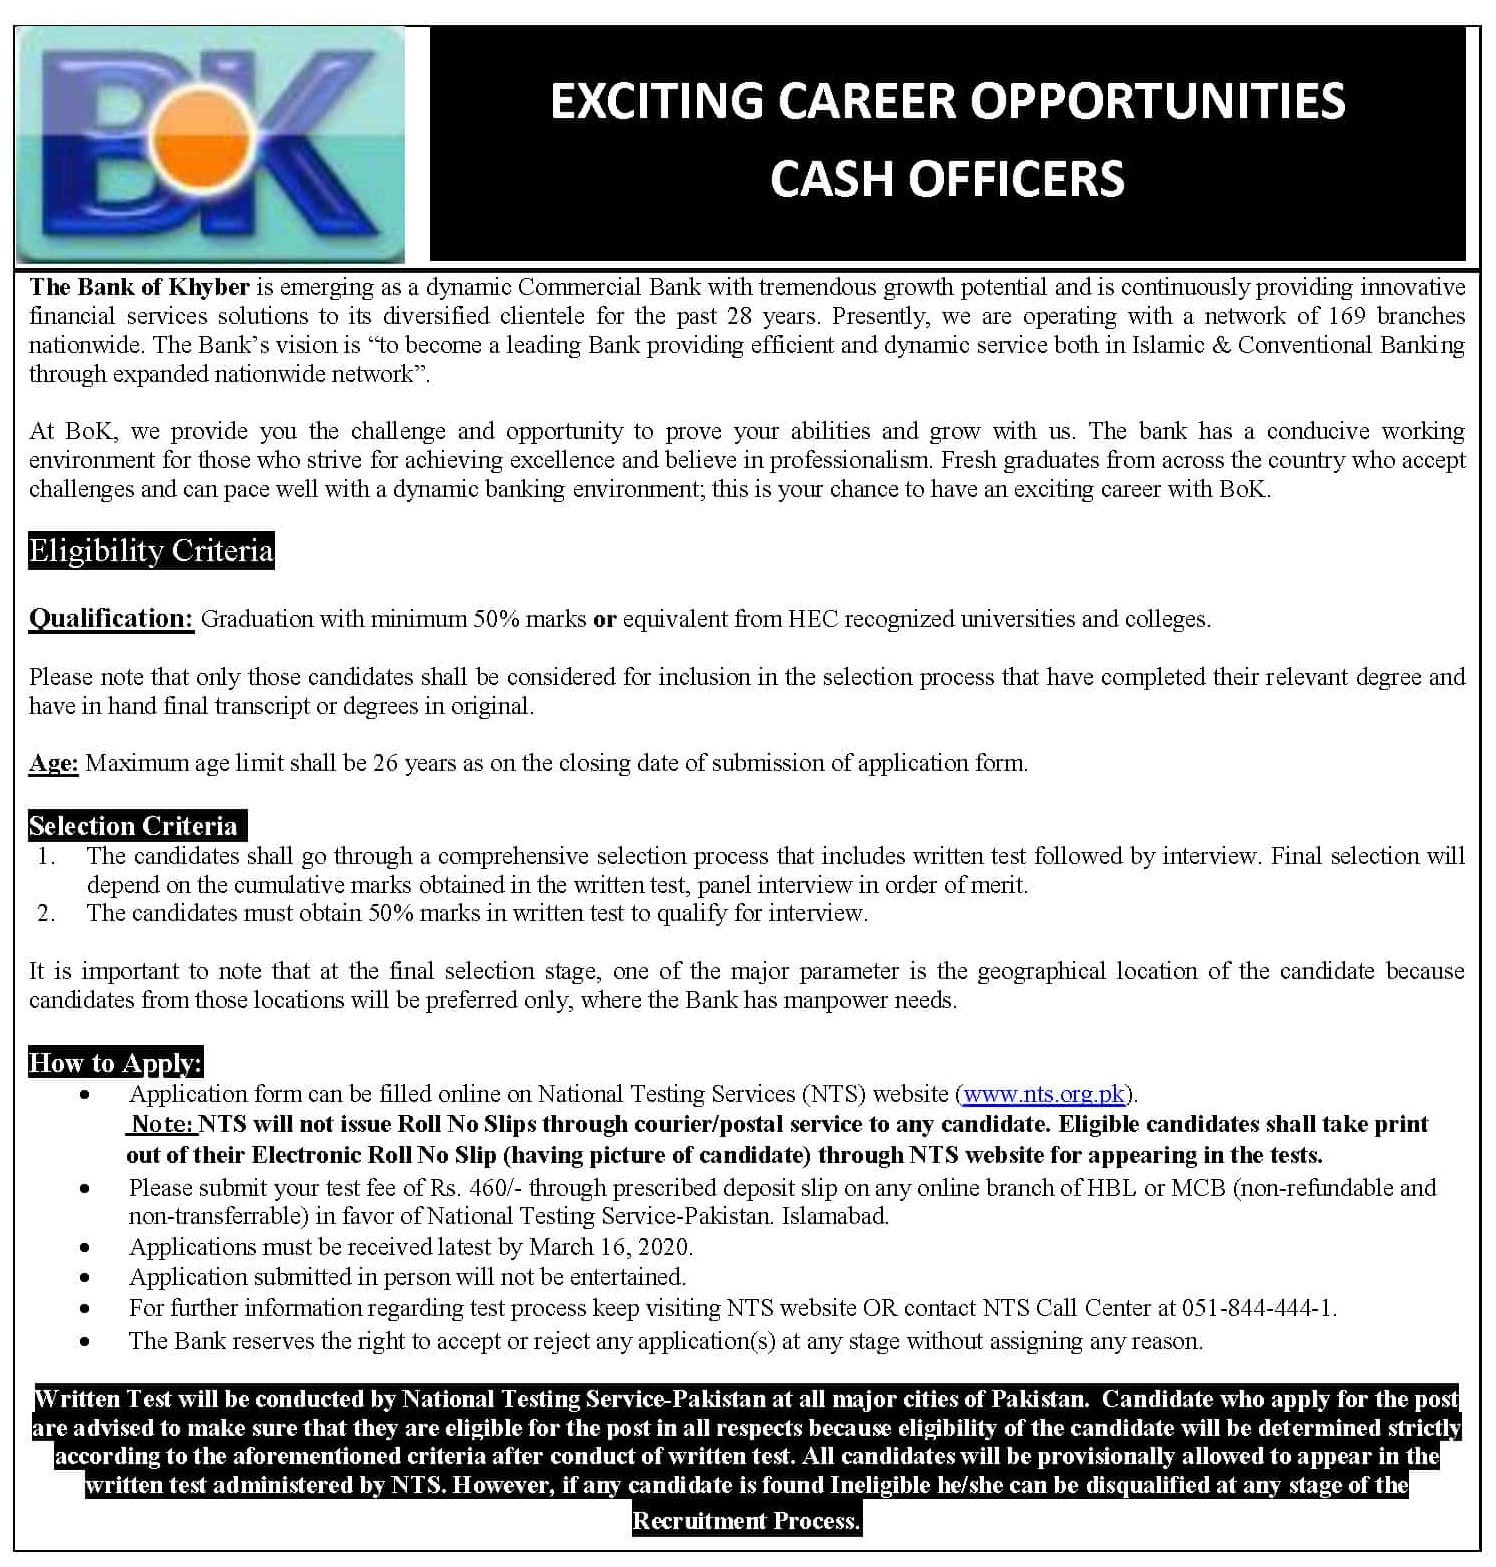 The Bank of Khyber (BOK) Jobs